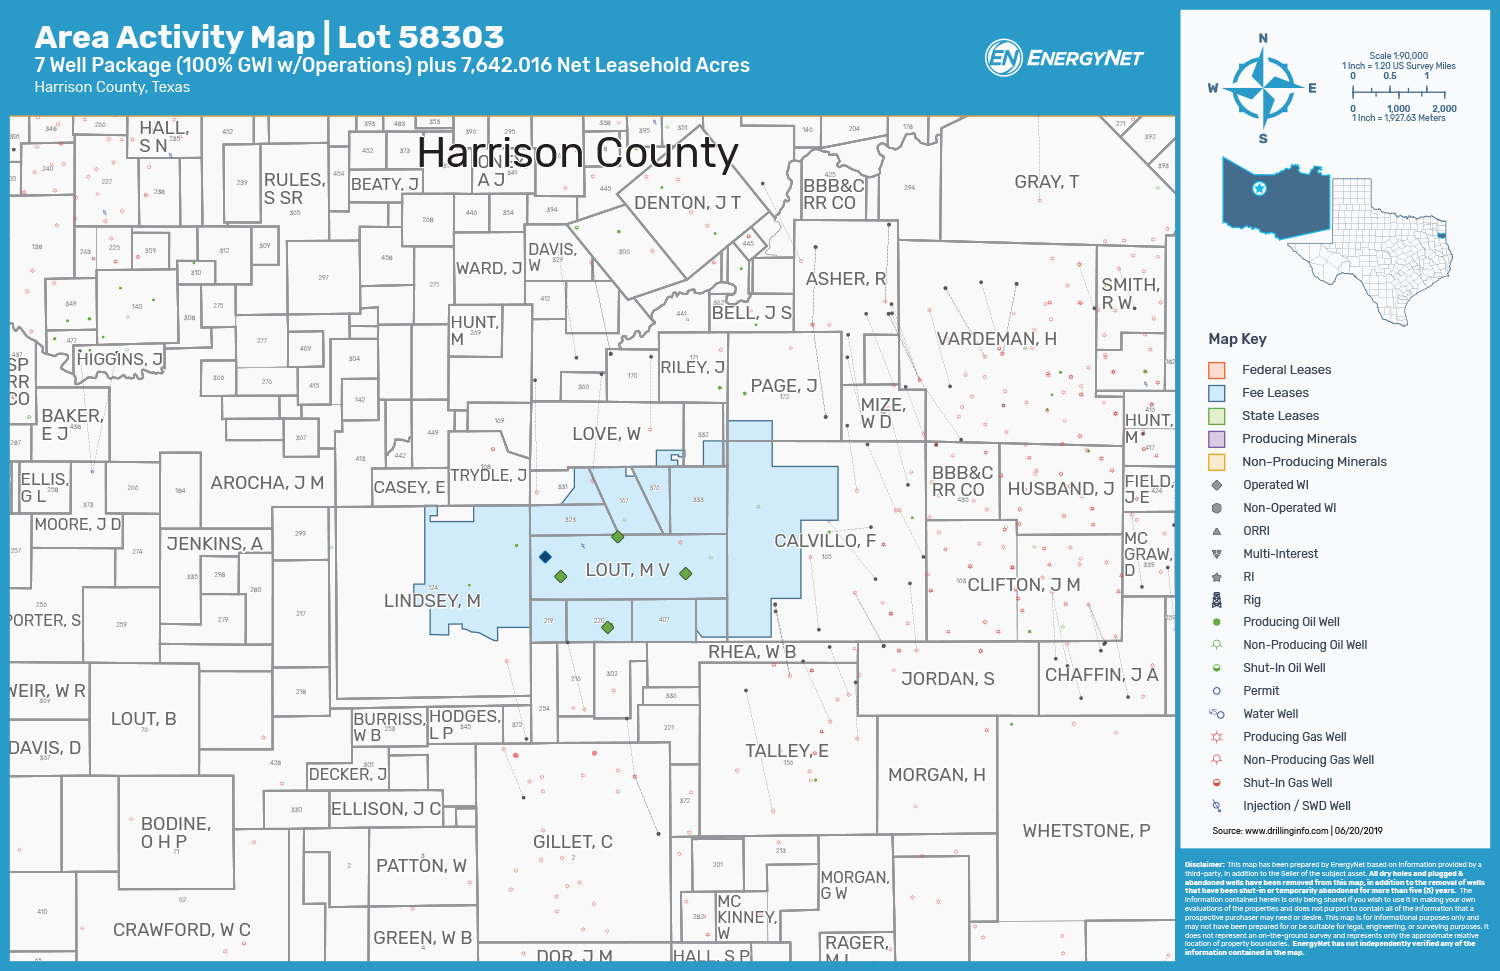 Horizontal Cotton Valley Opportunity, Harrison County, Texas Asset Map (Source: EnergyNet)